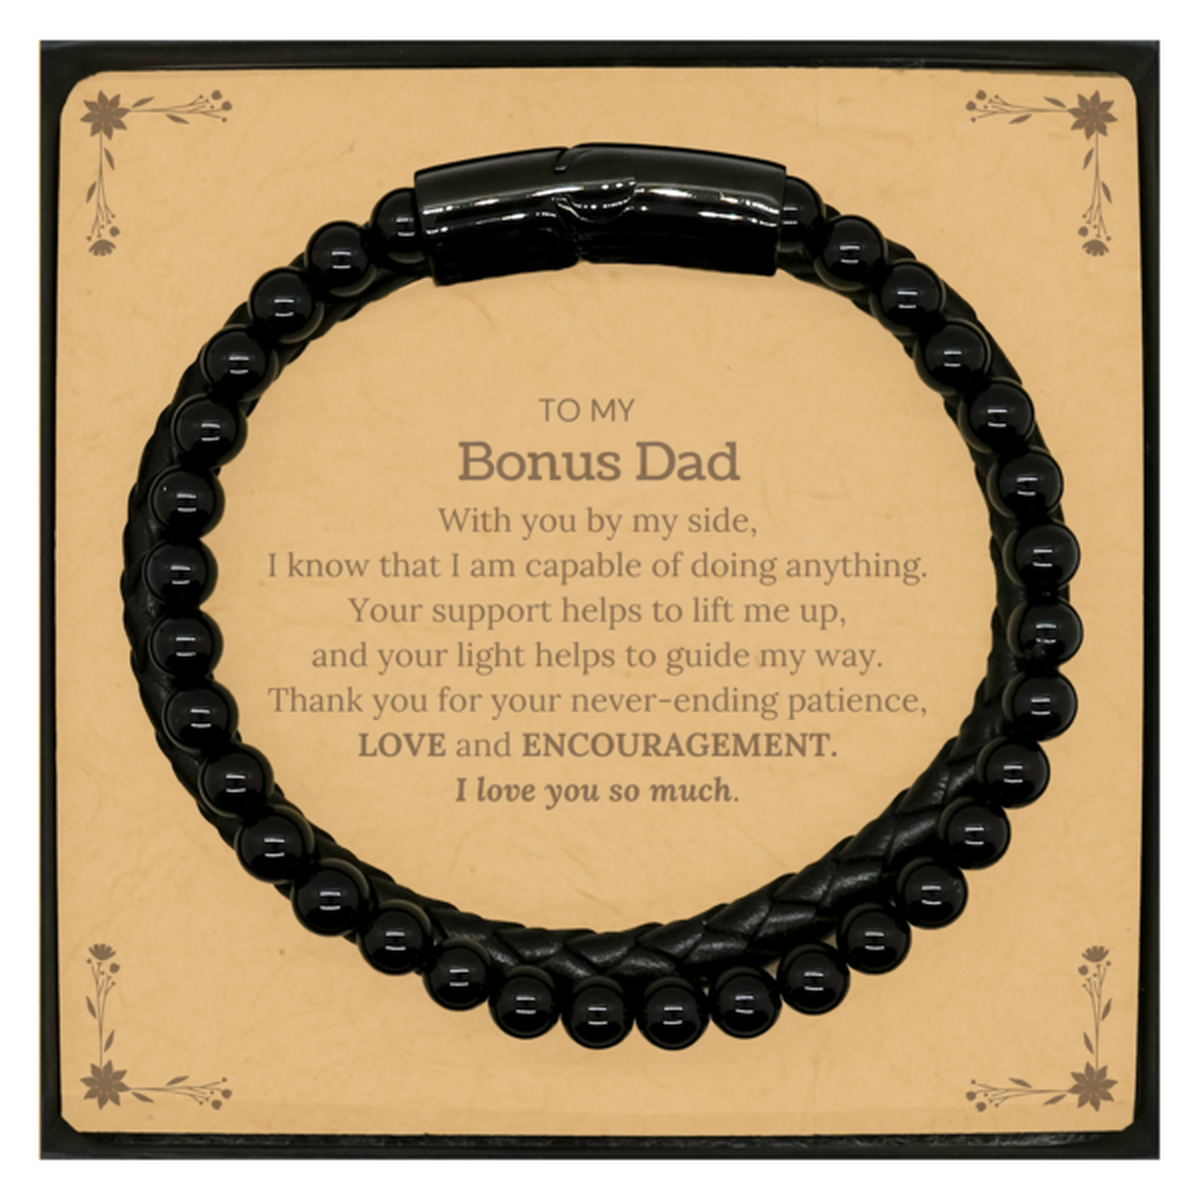 Appreciation Bonus Dad Stone Leather Bracelets Gifts, To My Bonus Dad Birthday Christmas Wedding Keepsake Gifts for Bonus Dad With you by my side, I know that I am capable of doing anything. I love you so much